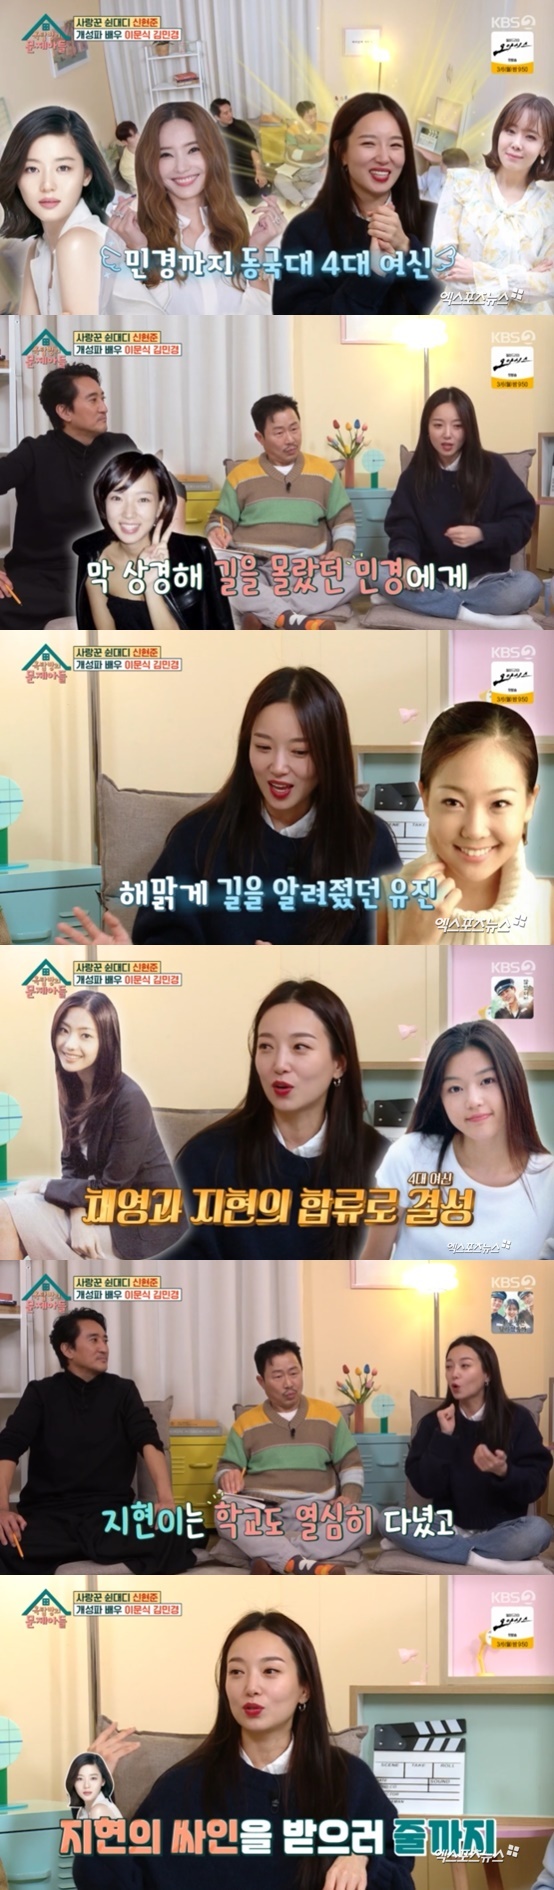 Problem Child in House Kim Min-kyung mentioned Jun Ji-hyunKBS 2TV  ⁇  Problem Child in House  ⁇  broadcasted on the 1st appeared Shin Hyun-joon, Lee Moon-sik and Kim Min-kyung who joined together in the movie  ⁇   ⁇   ⁇   ⁇   ⁇ .Kim Min-kyung is famous as the 4th Goddess of Dongguk Girls High School in 2001 with Miss Korea Jin, Jun Ji-hyun, Han Chae-young and So Yoo-jin.Kim Min-kyung said, (The four of us) were close. Dont you go to get a pass before entering the school? A very pretty girl walking up the train from Daegu and going to the gym walked.I asked him if he knew how to go to the gym, and he said, Come with me. It was Eugene. He added, My birthday was on August 10th and August 11th, so my student number was posted. As I naturally became close to Eugene, I became close to (Han) Chae-young, and I became close to (former) Ji County and Shanxi.When asked by Kim Sook, Isnt it a mess when four people go to school? he said, Especially Ji County, Shanxi went to school hard. When I went to a restaurant, I was in line to get an autograph, conveying Jun Ji-hyuns popularity.In addition, Kim Min-kyung said that 20,000 anti-fans were created a day after Miss Koreas Jin You. At that time, he suffered from various rumors such as 800 million whole body molding and mothers external pressure.Song Eun-yi recalled, I remember, too. At that time, I was talking a lot. I thought it must have been hard because of the image of Miss Korea because I was good at acting in teacher Kim Soo-hyuns drama.Kim Min-kyung said, At that time, I was able to make my debut as a main character when I became a Miss Korea gin. In the case of me, I wanted to go up the stairs slowly because I wanted to get more insults.I made my debut from a small role in the Sunday morning drama Something of 1%. Jung Hyung-don said, If you are Miss Korea in 2001, then you are in your 40s. When Min Kyung-hoon said that he was 84 years old, Kim Min-kyung said, I am sister.Photo: KBS 2TV broadcast screen